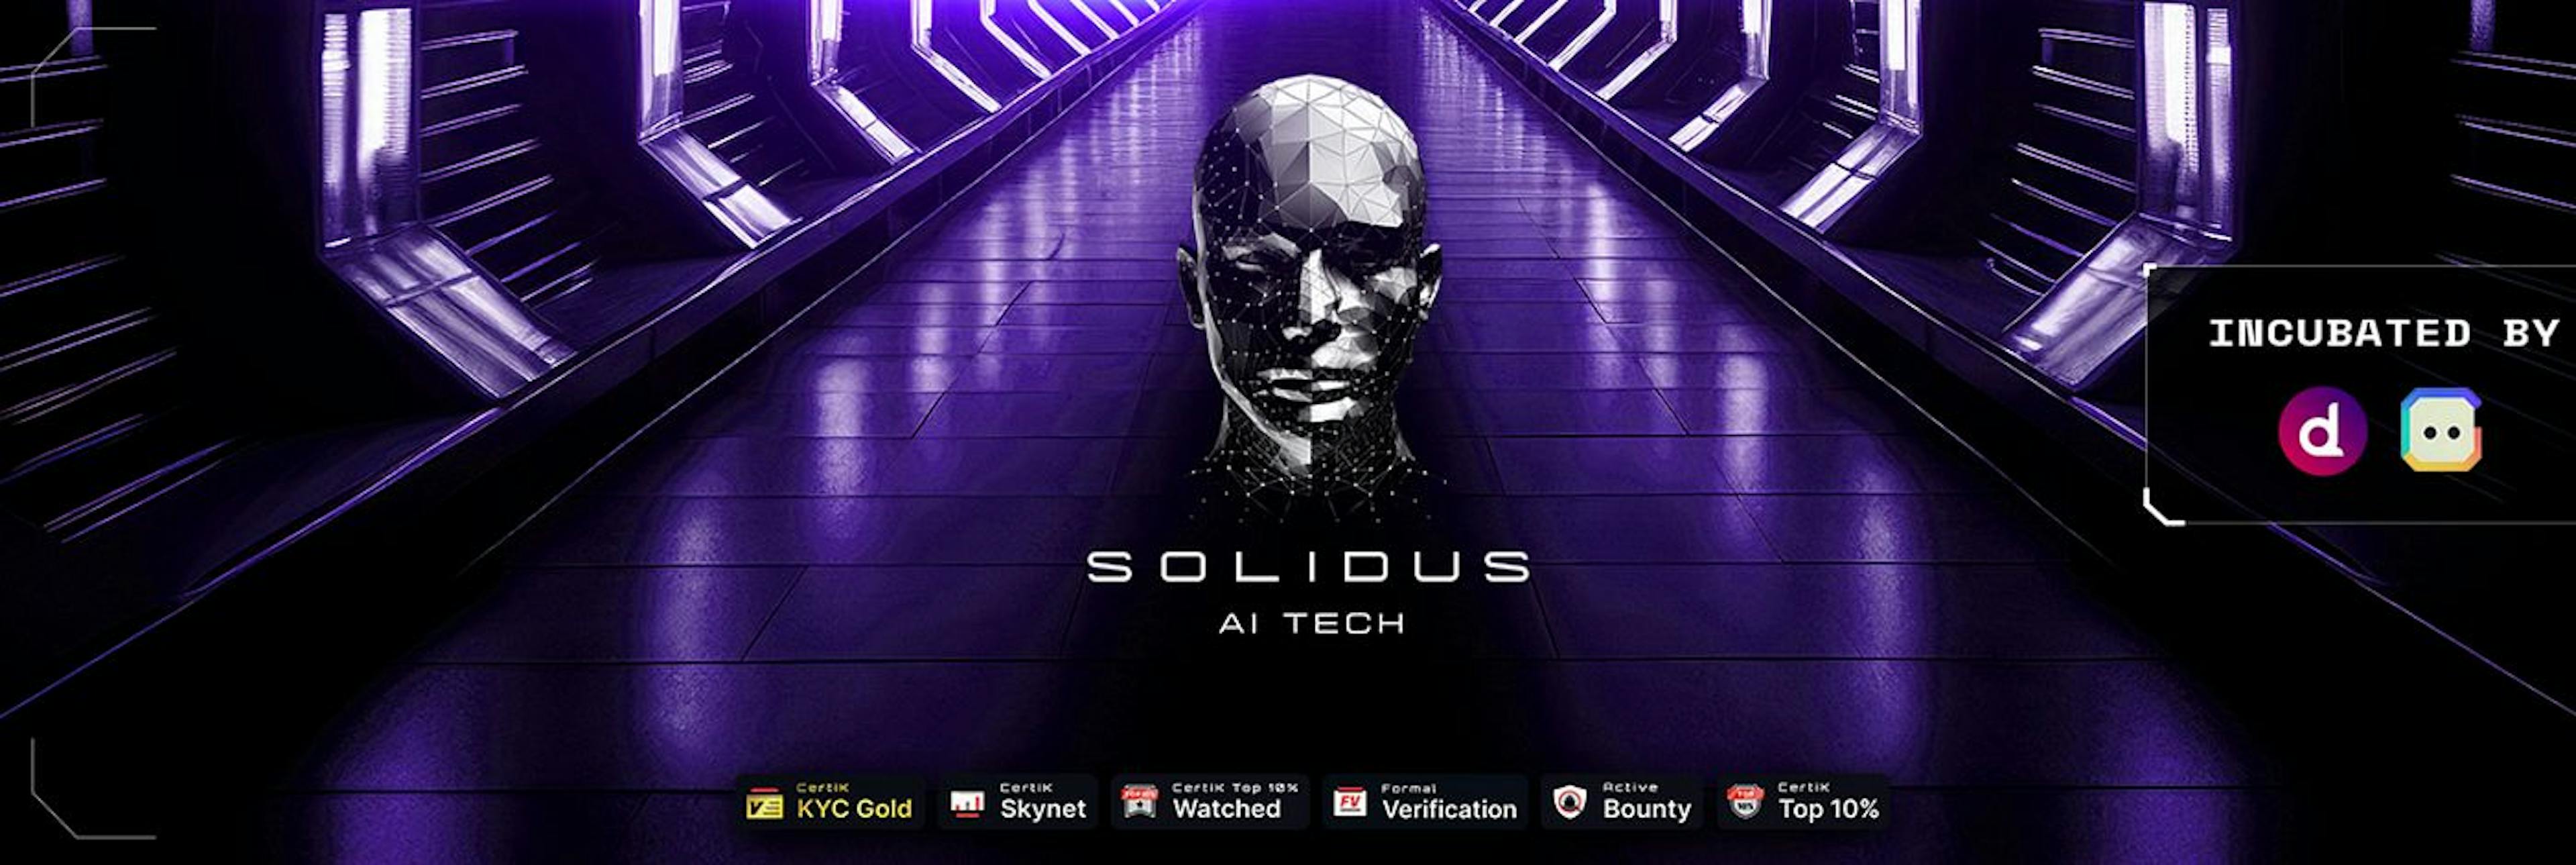 featured image - Pioneering the Future of Tech: Solidus AI Tech Unveils a New Era with AIaaS, BaaS, and HPC